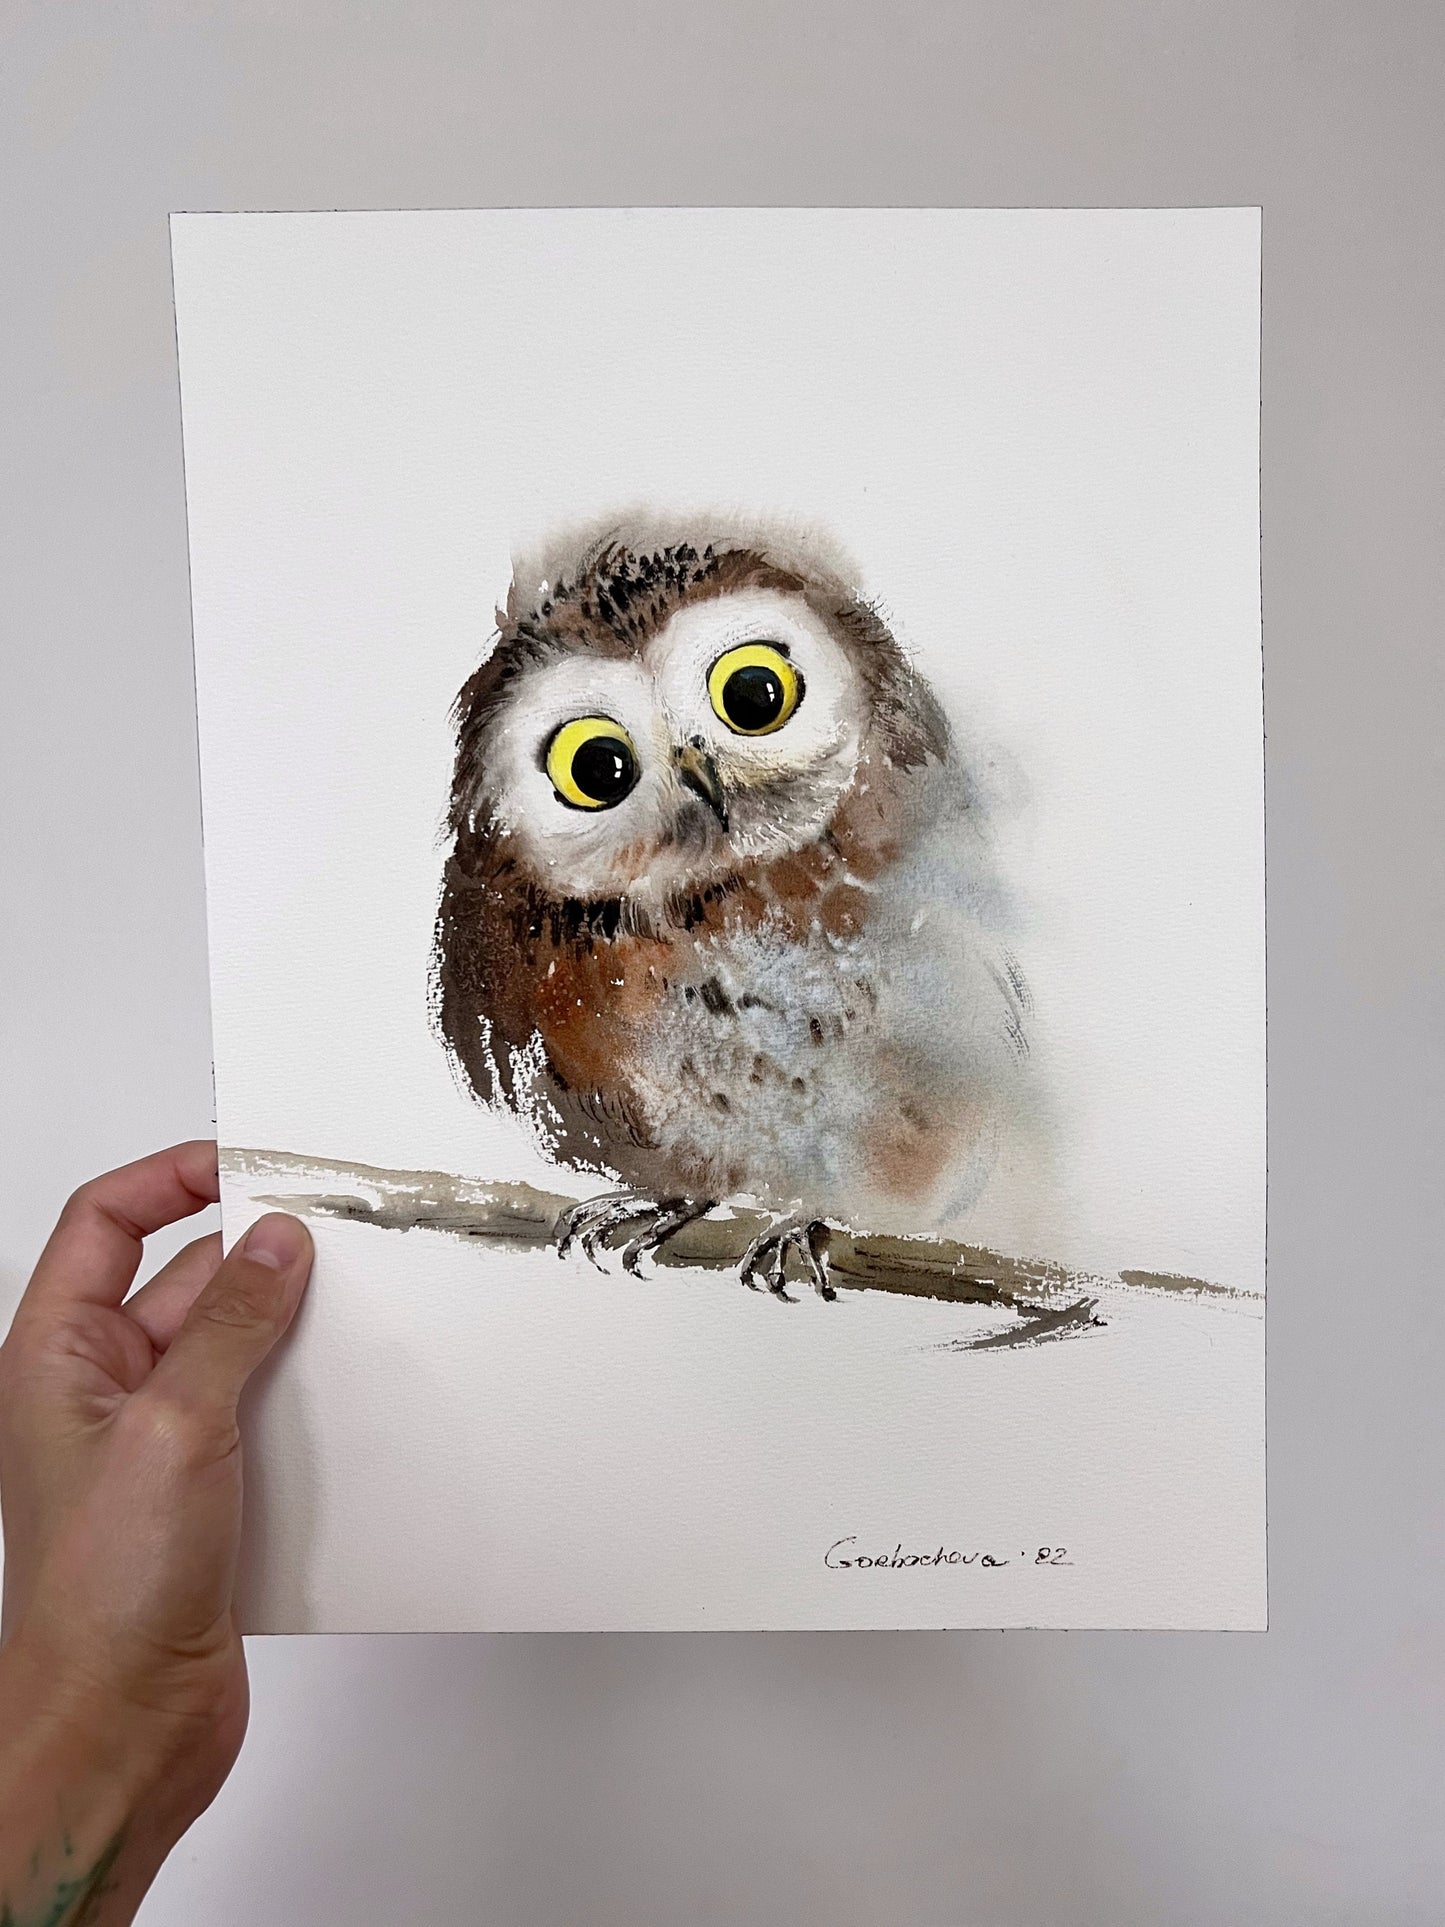 Baby Owl Watercolor Painting, Small Original Artwork, New Year Christmas Gift For Bird Lover, Kids Room Wall Art Decor